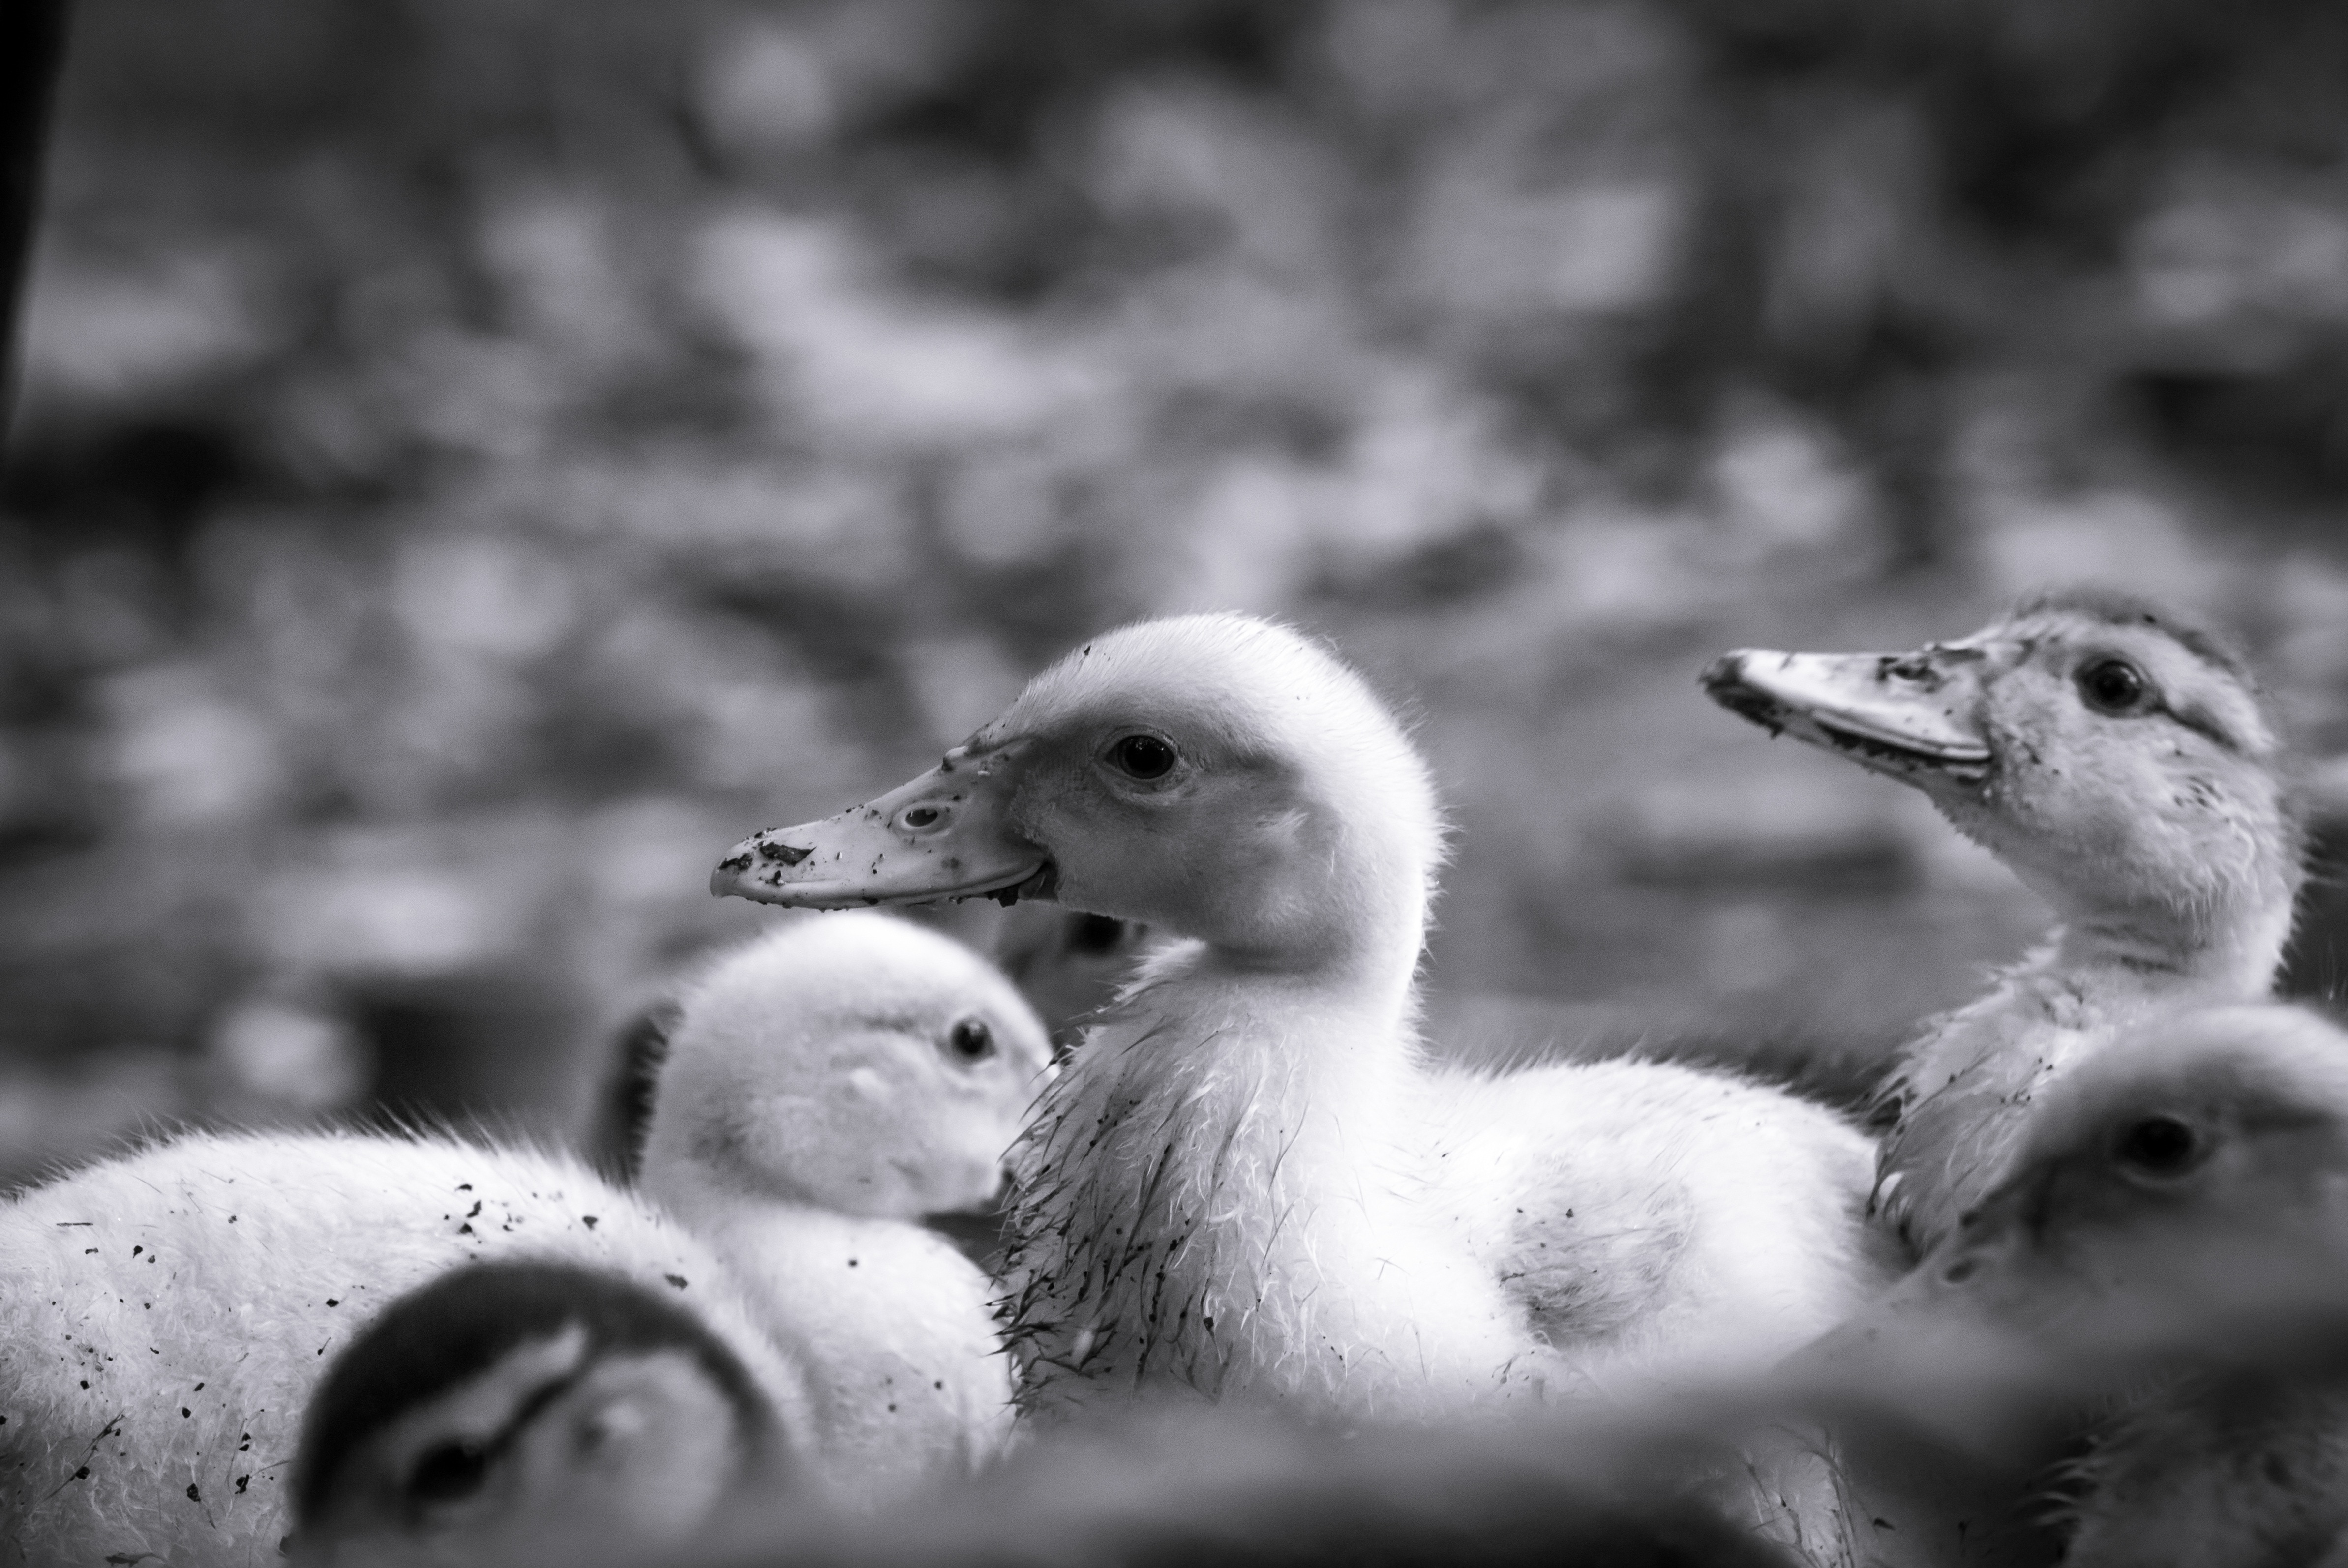 ducklings grayscale photo